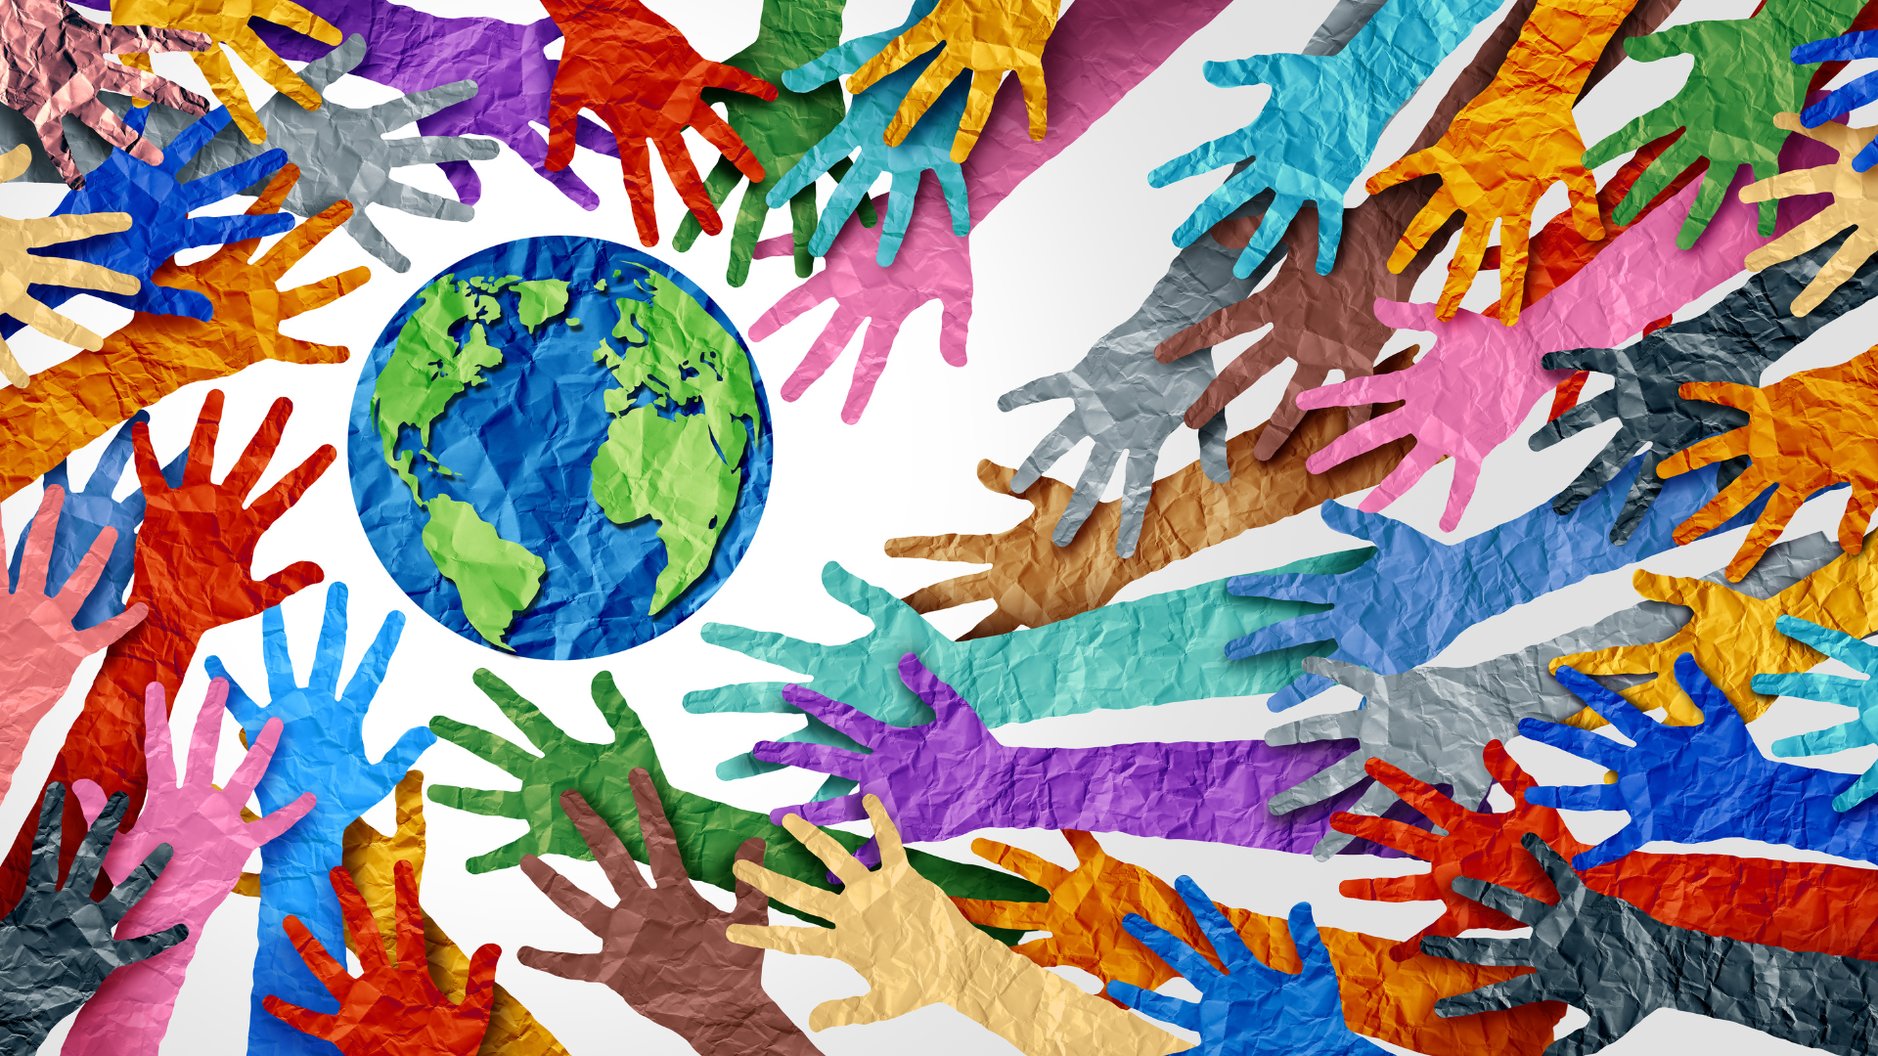 Friendship and Collaboration in Diverse Communities – Conference and Networking Event - Saturday, 20 May, 10.30 AM – 3.00 PM in the Irish School of Ecumenics, Trinity College Dublin.